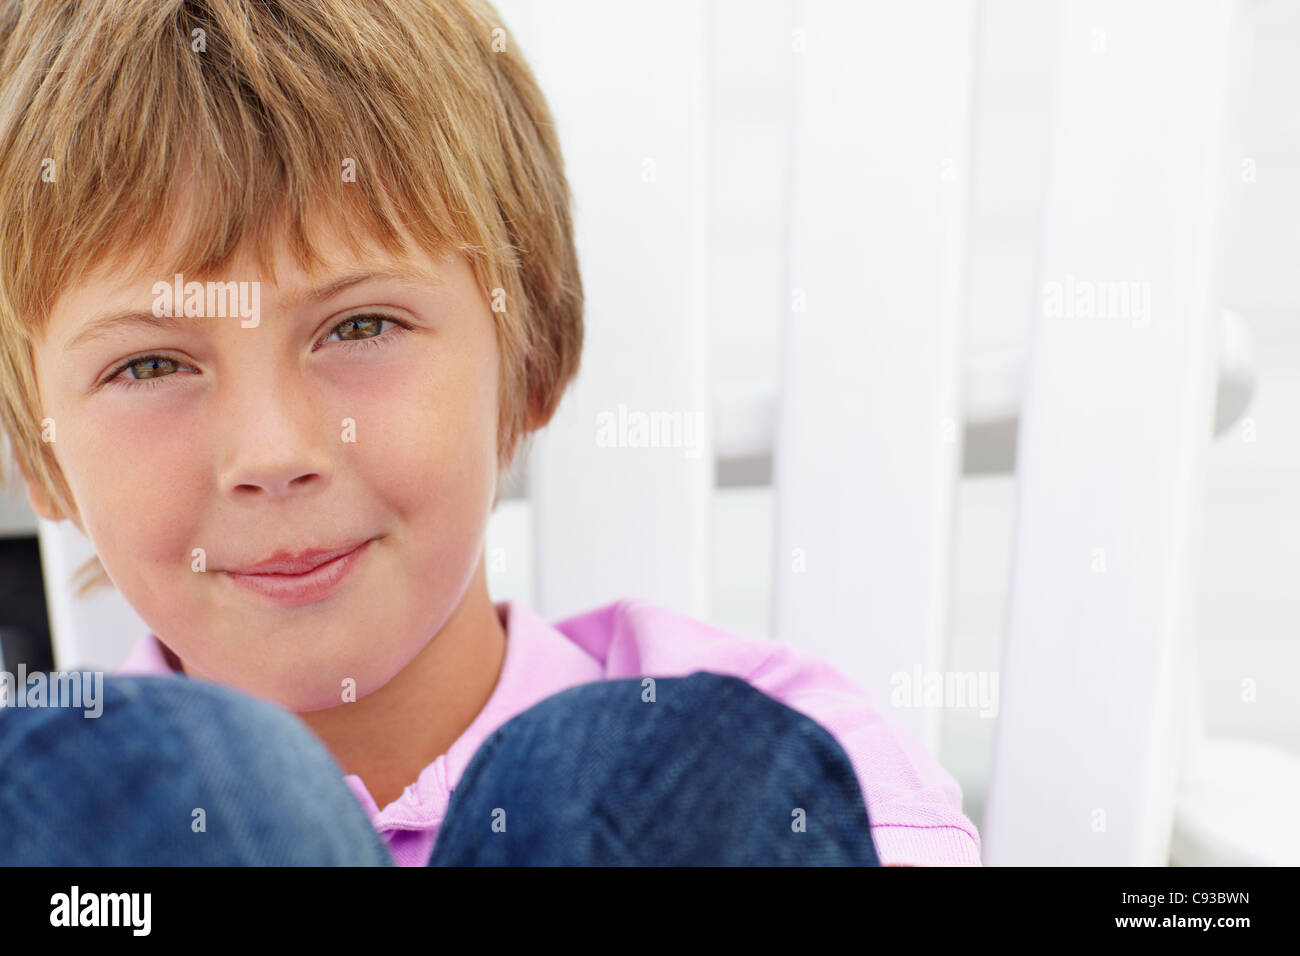 Portrait young boy outdoors Stock Photo